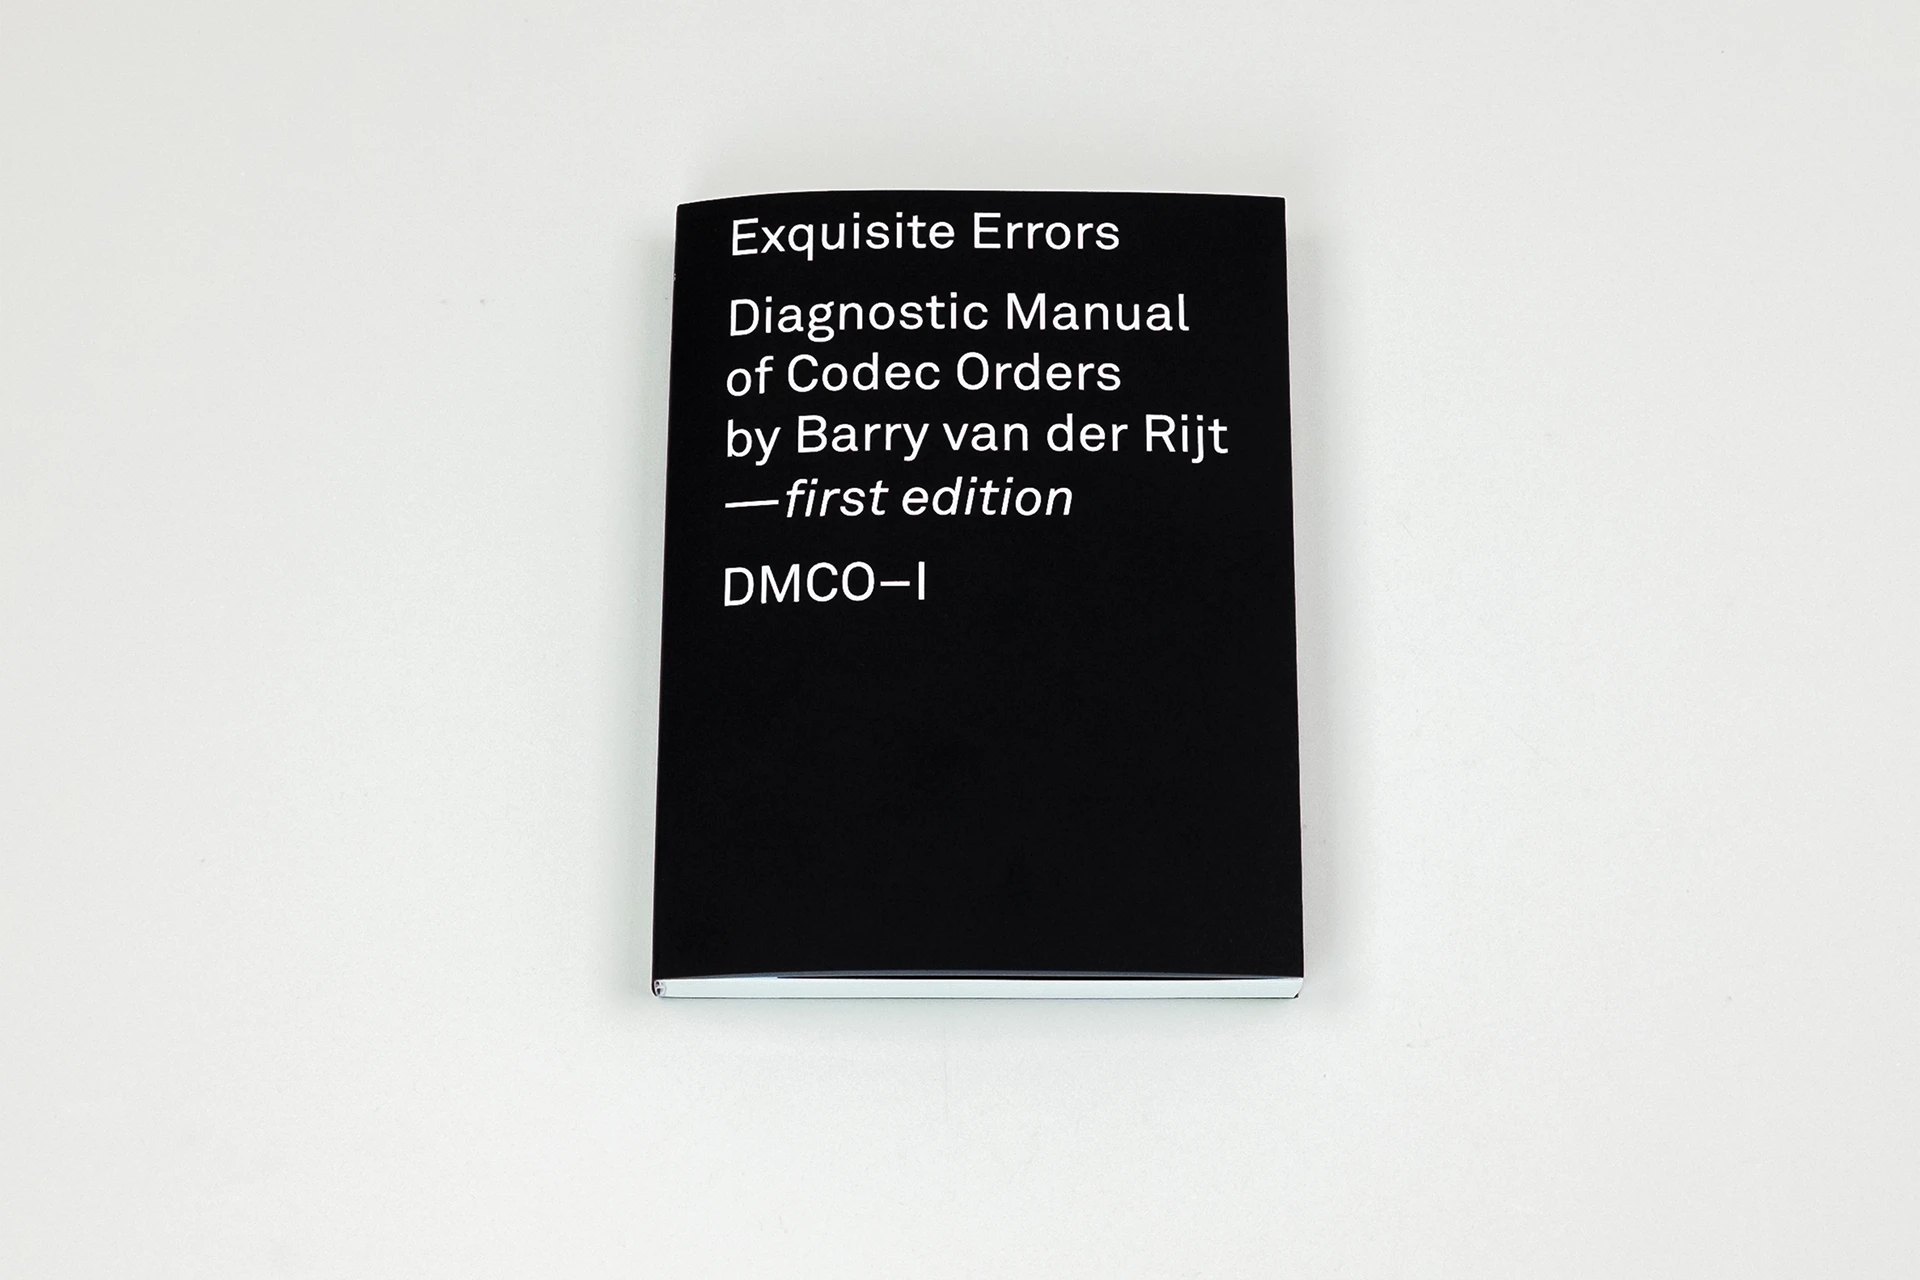 Exquisite Errors: DMCO-I (edition) - The Eriskay Connection